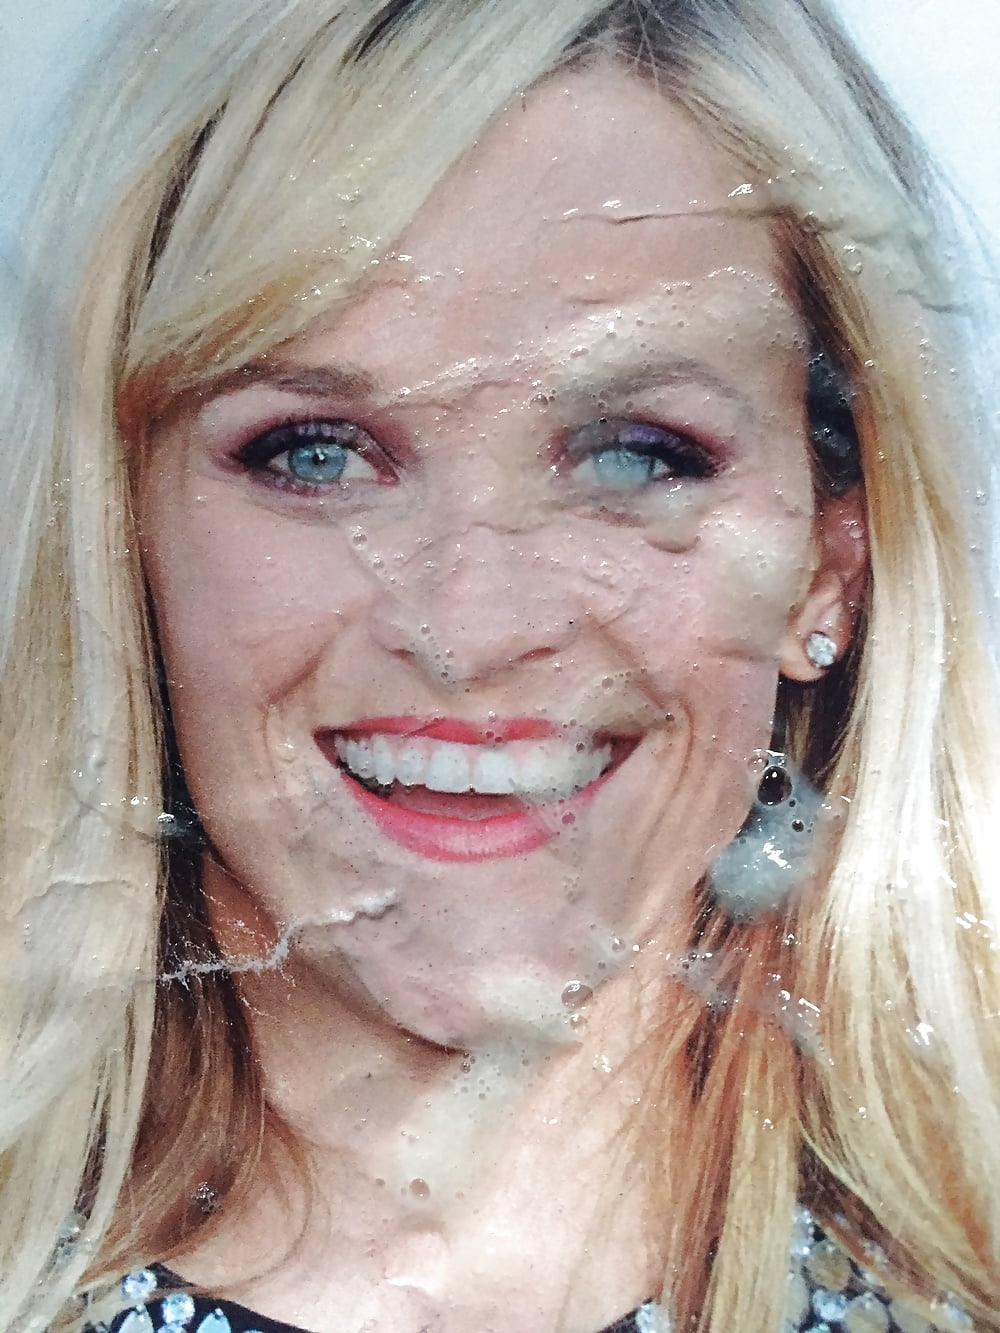 Cum_Tribute_-_Reese_Witherspoon_2 (11/25)